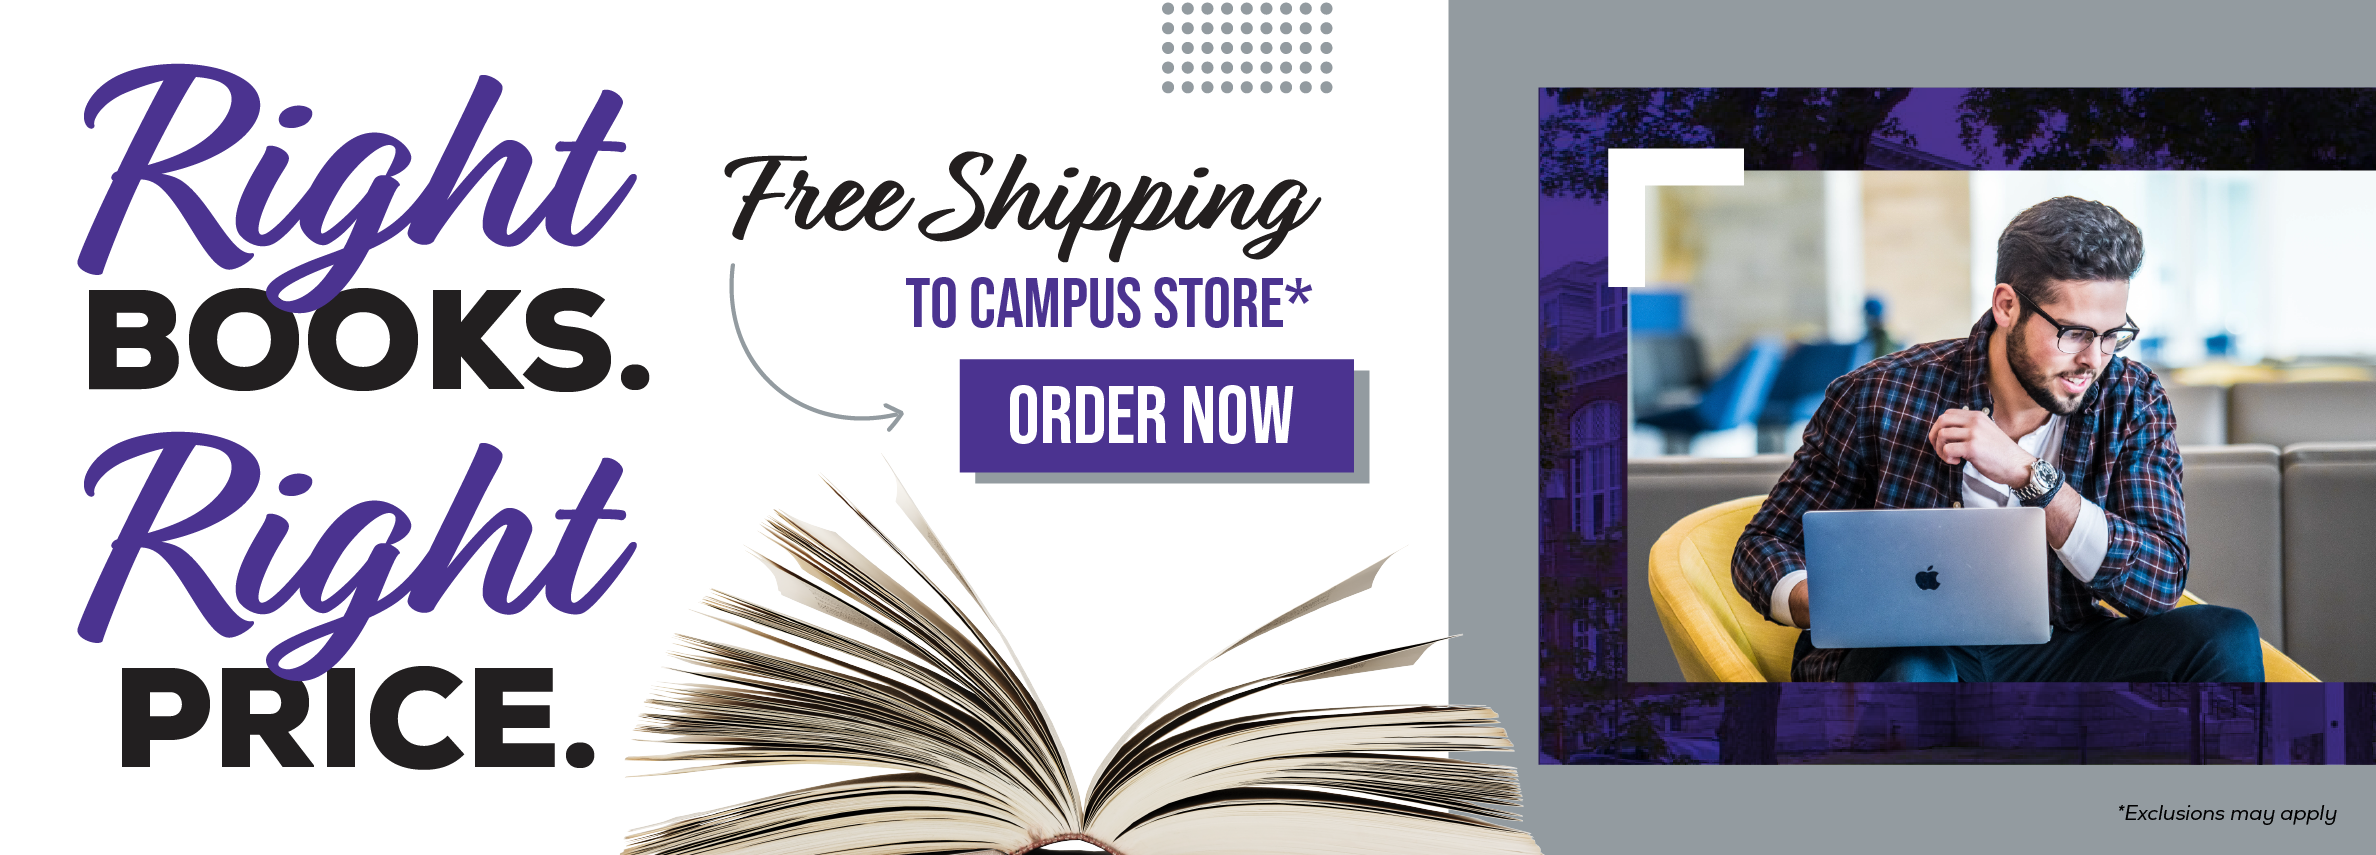 Right books. Right price. Free shipping to Campus Store.* Order now. *Exclusions may apply.